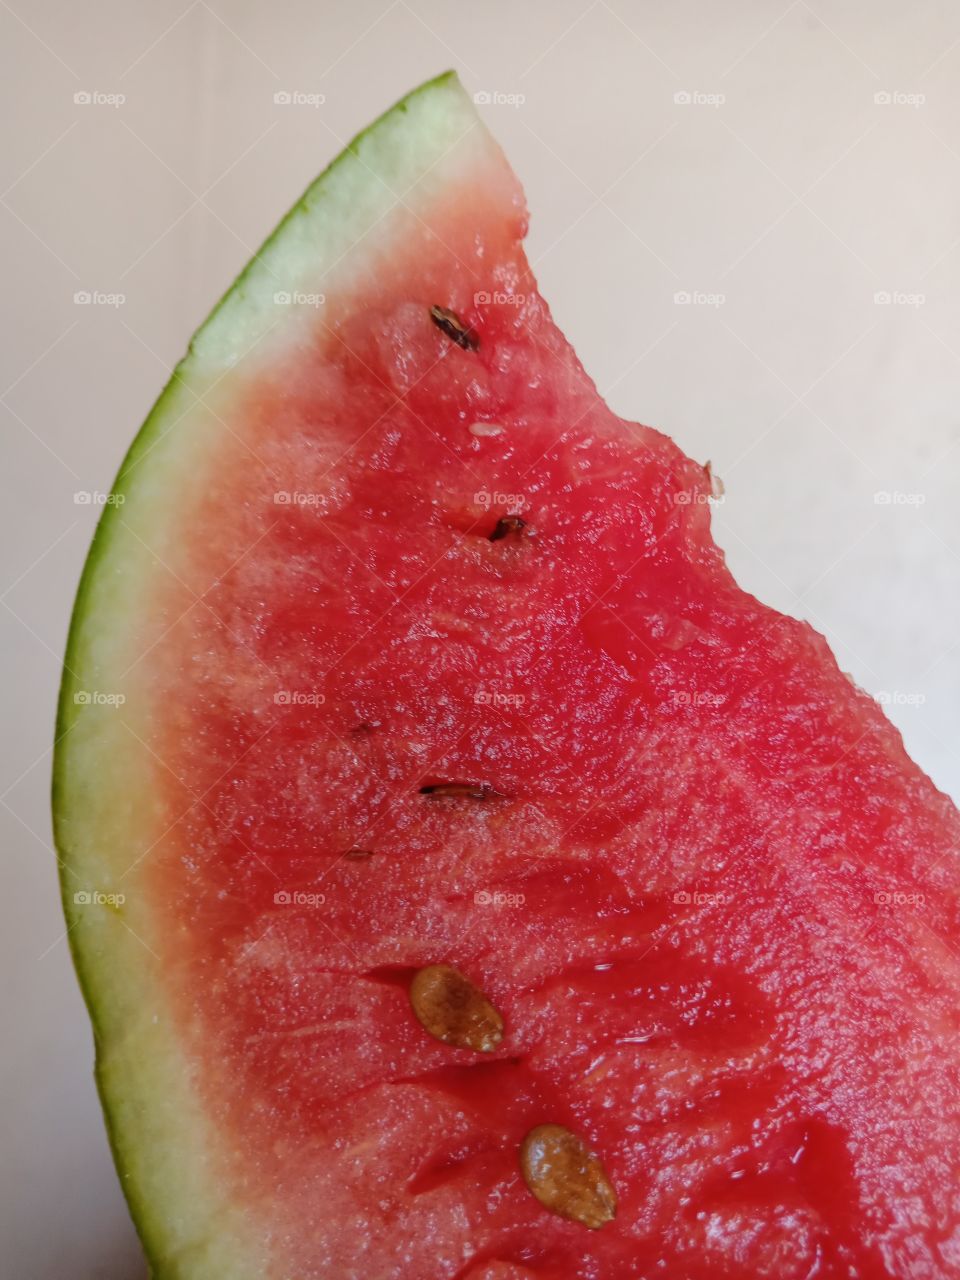 Watery melon